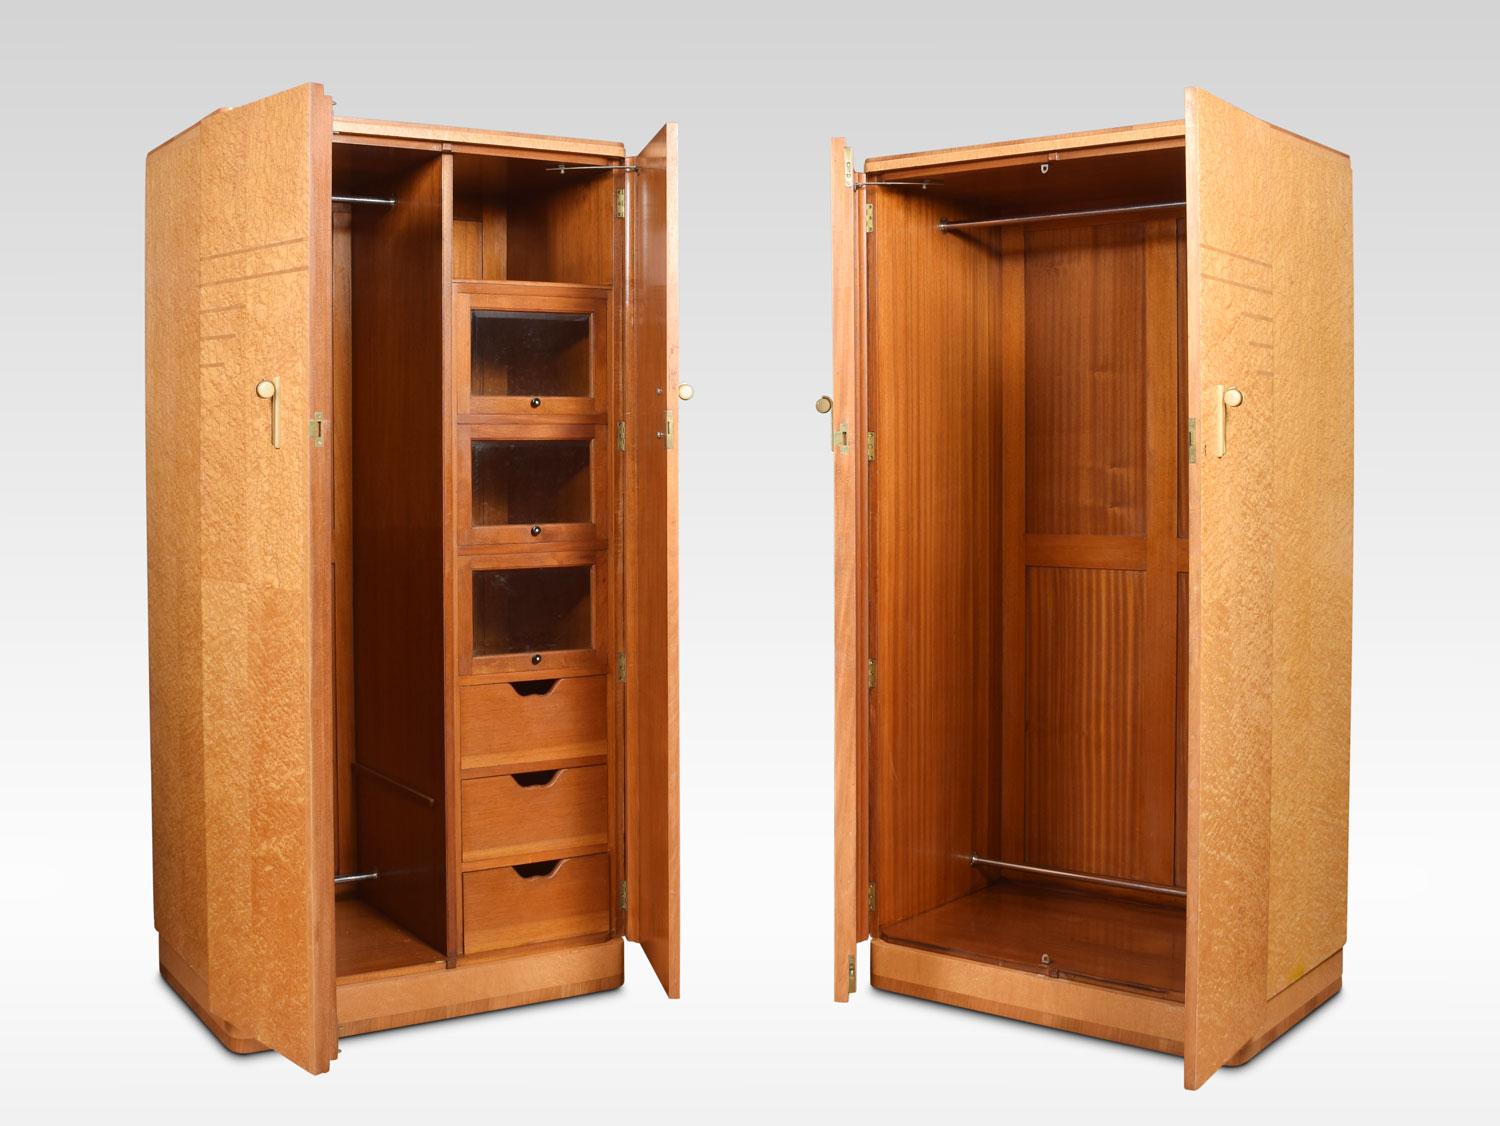 A pair of maple and walnut Art Deco wardrobes, both having two large doors with original Bakelite handles. One combination wardrobe fitted with glazed compartments, drawers and hanging space. The other wardrobe fitted with large hanging rail. All